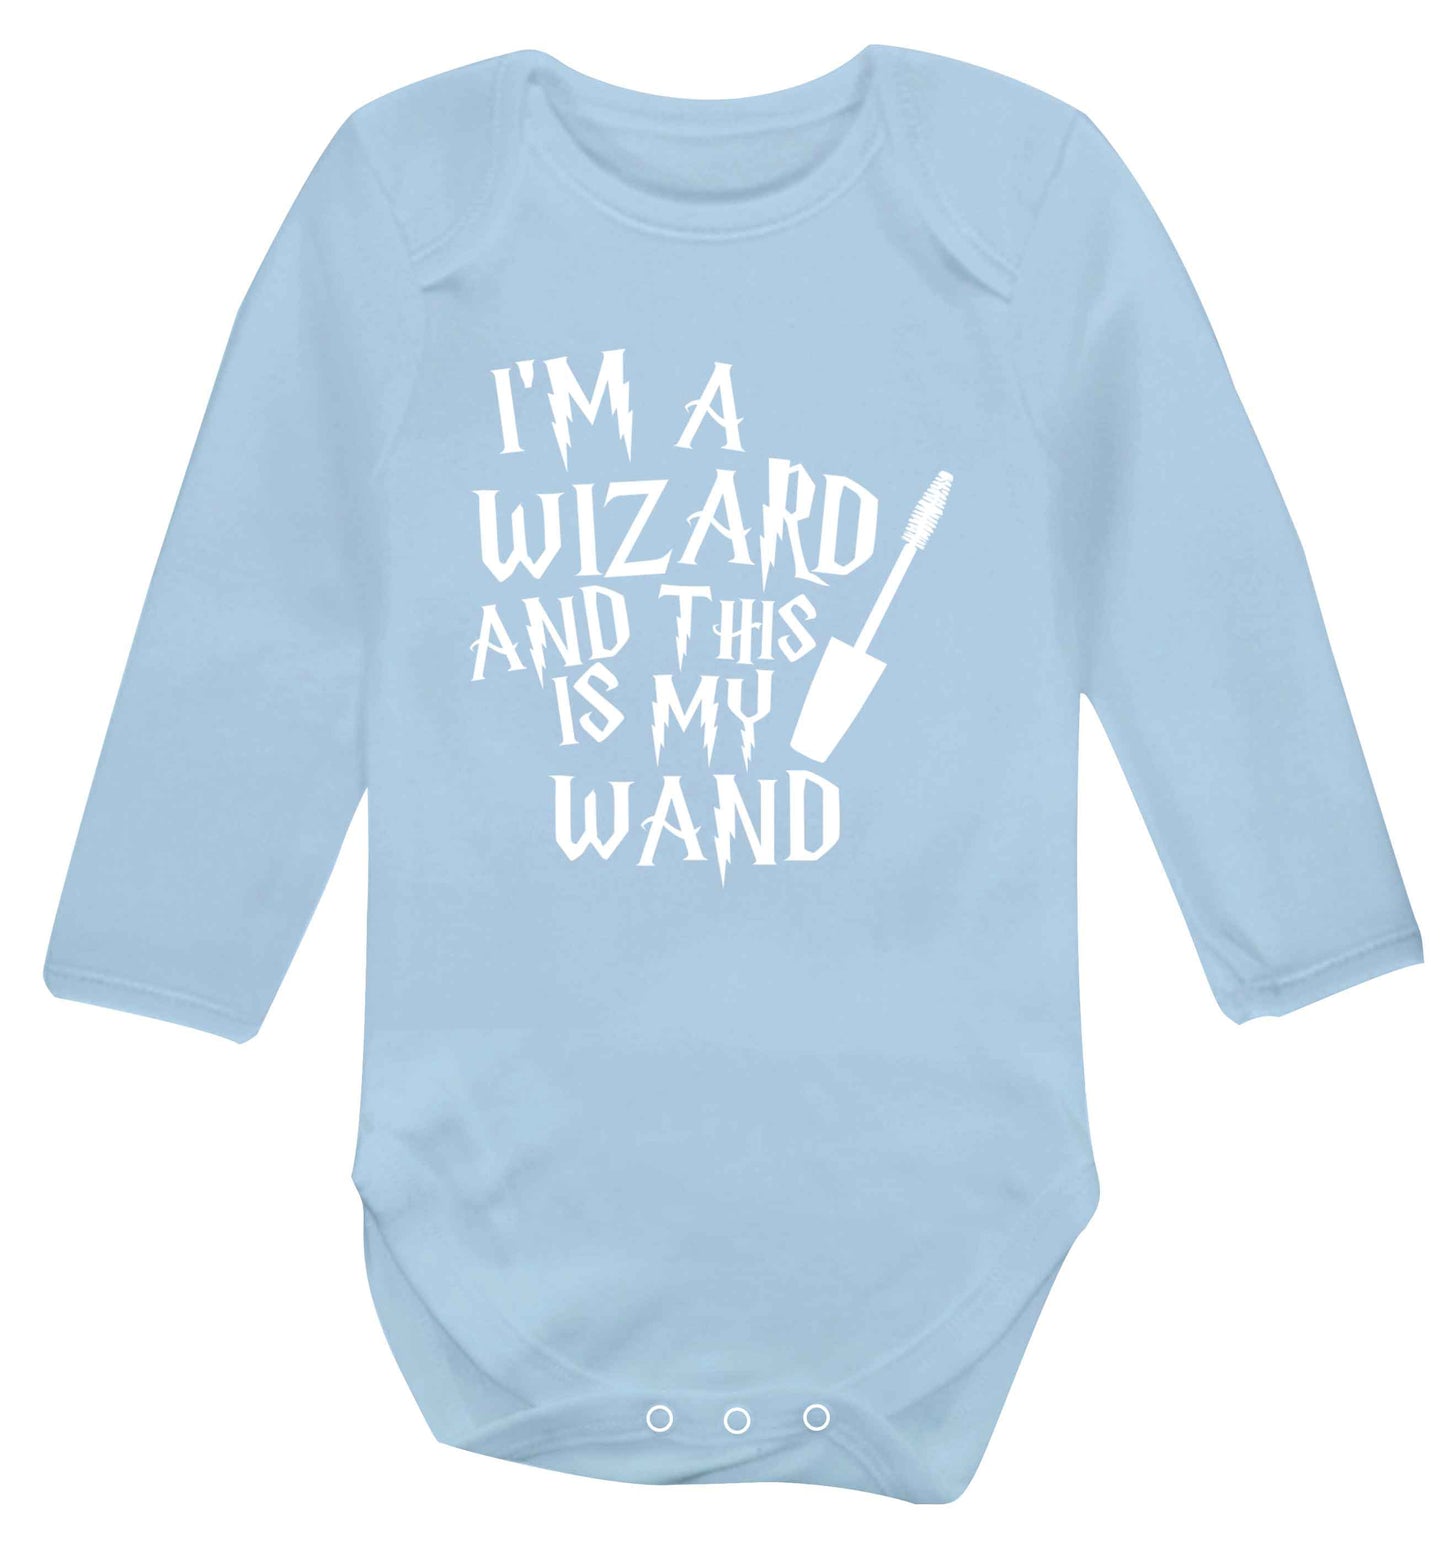 I'm a wizard and this is my wand Baby Vest long sleeved pale blue 6-12 months